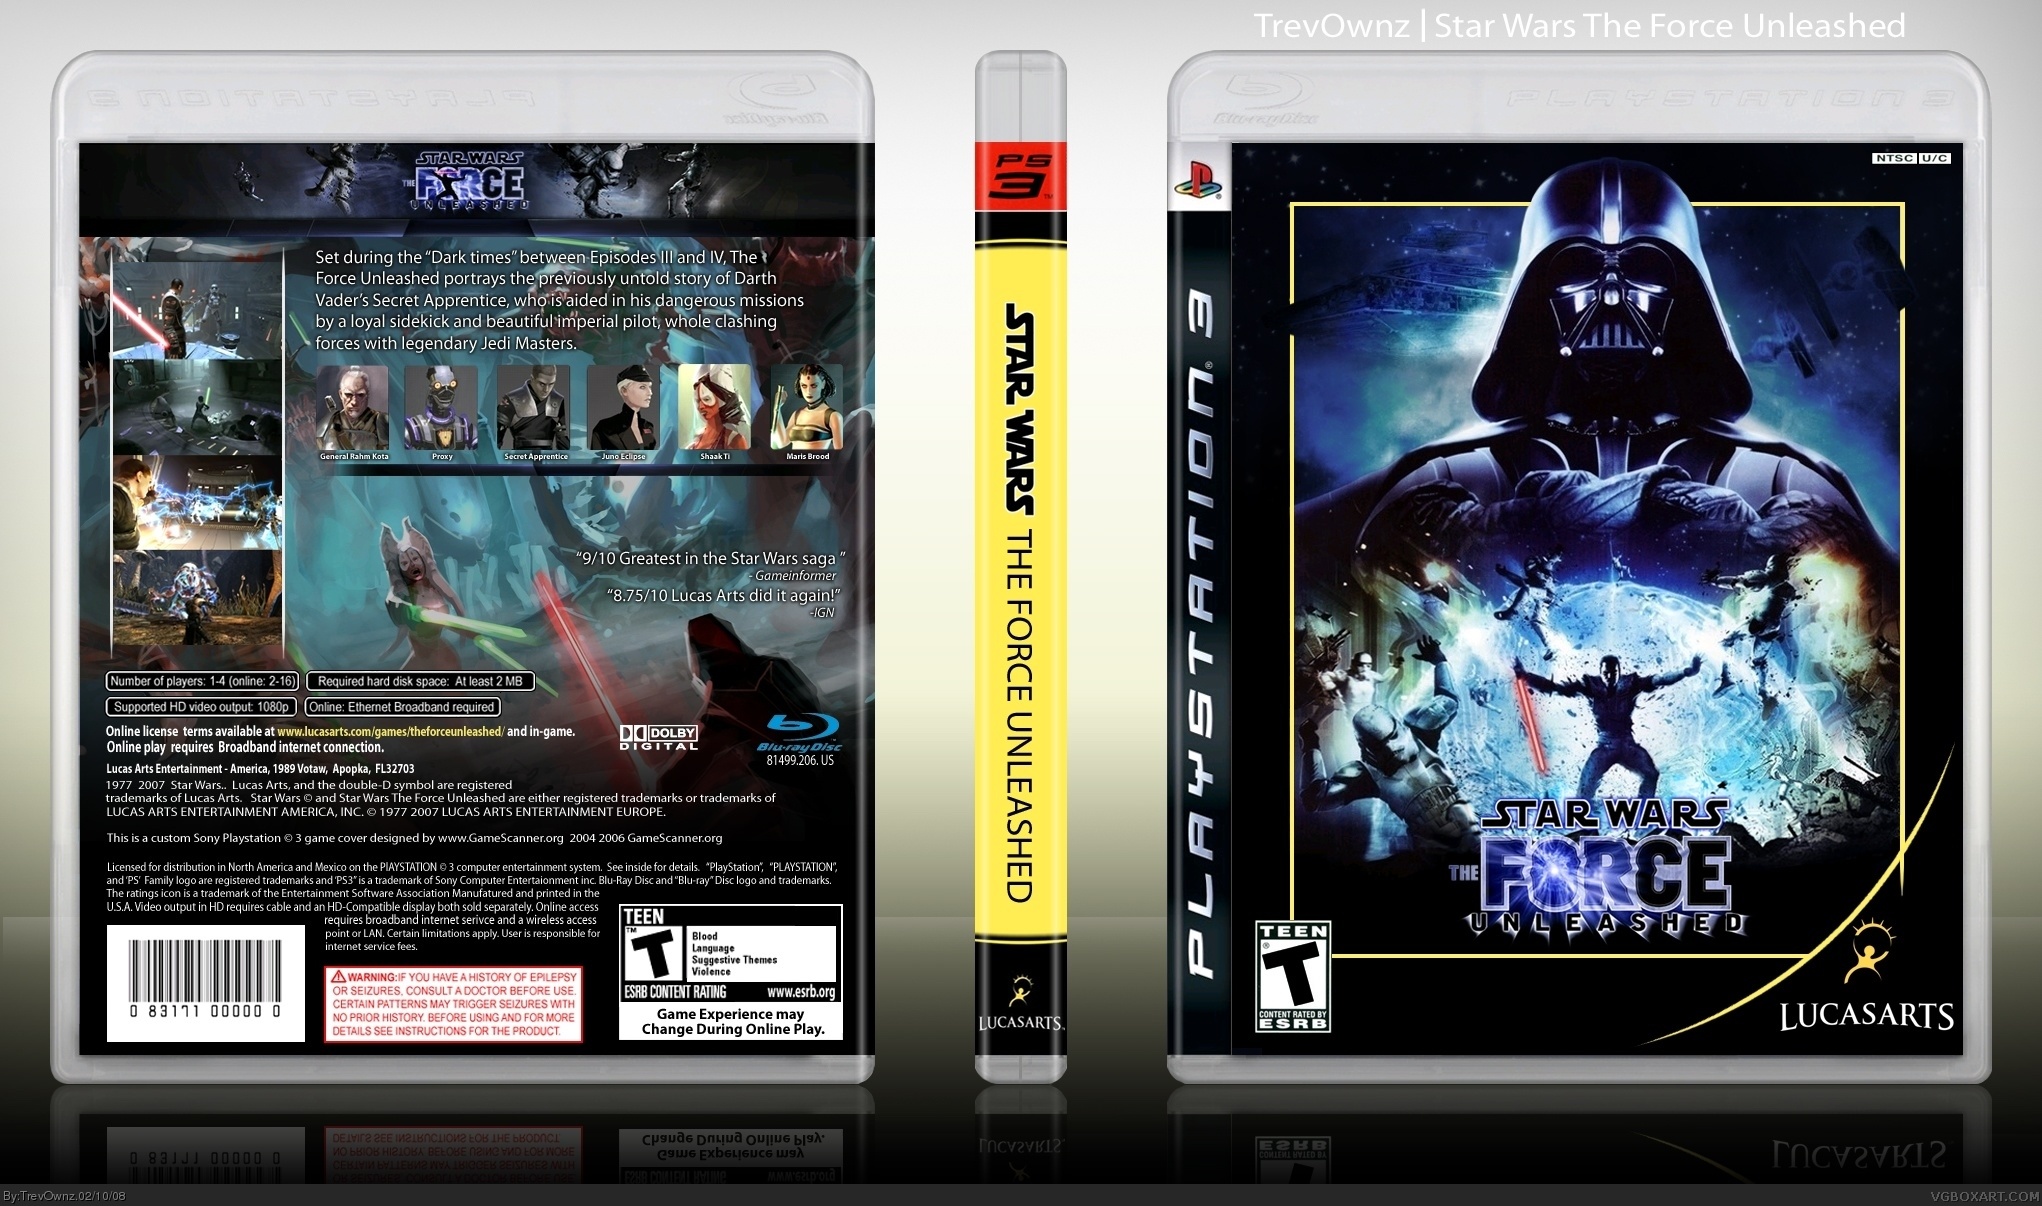 Star Wars: The Force Unleashed box cover